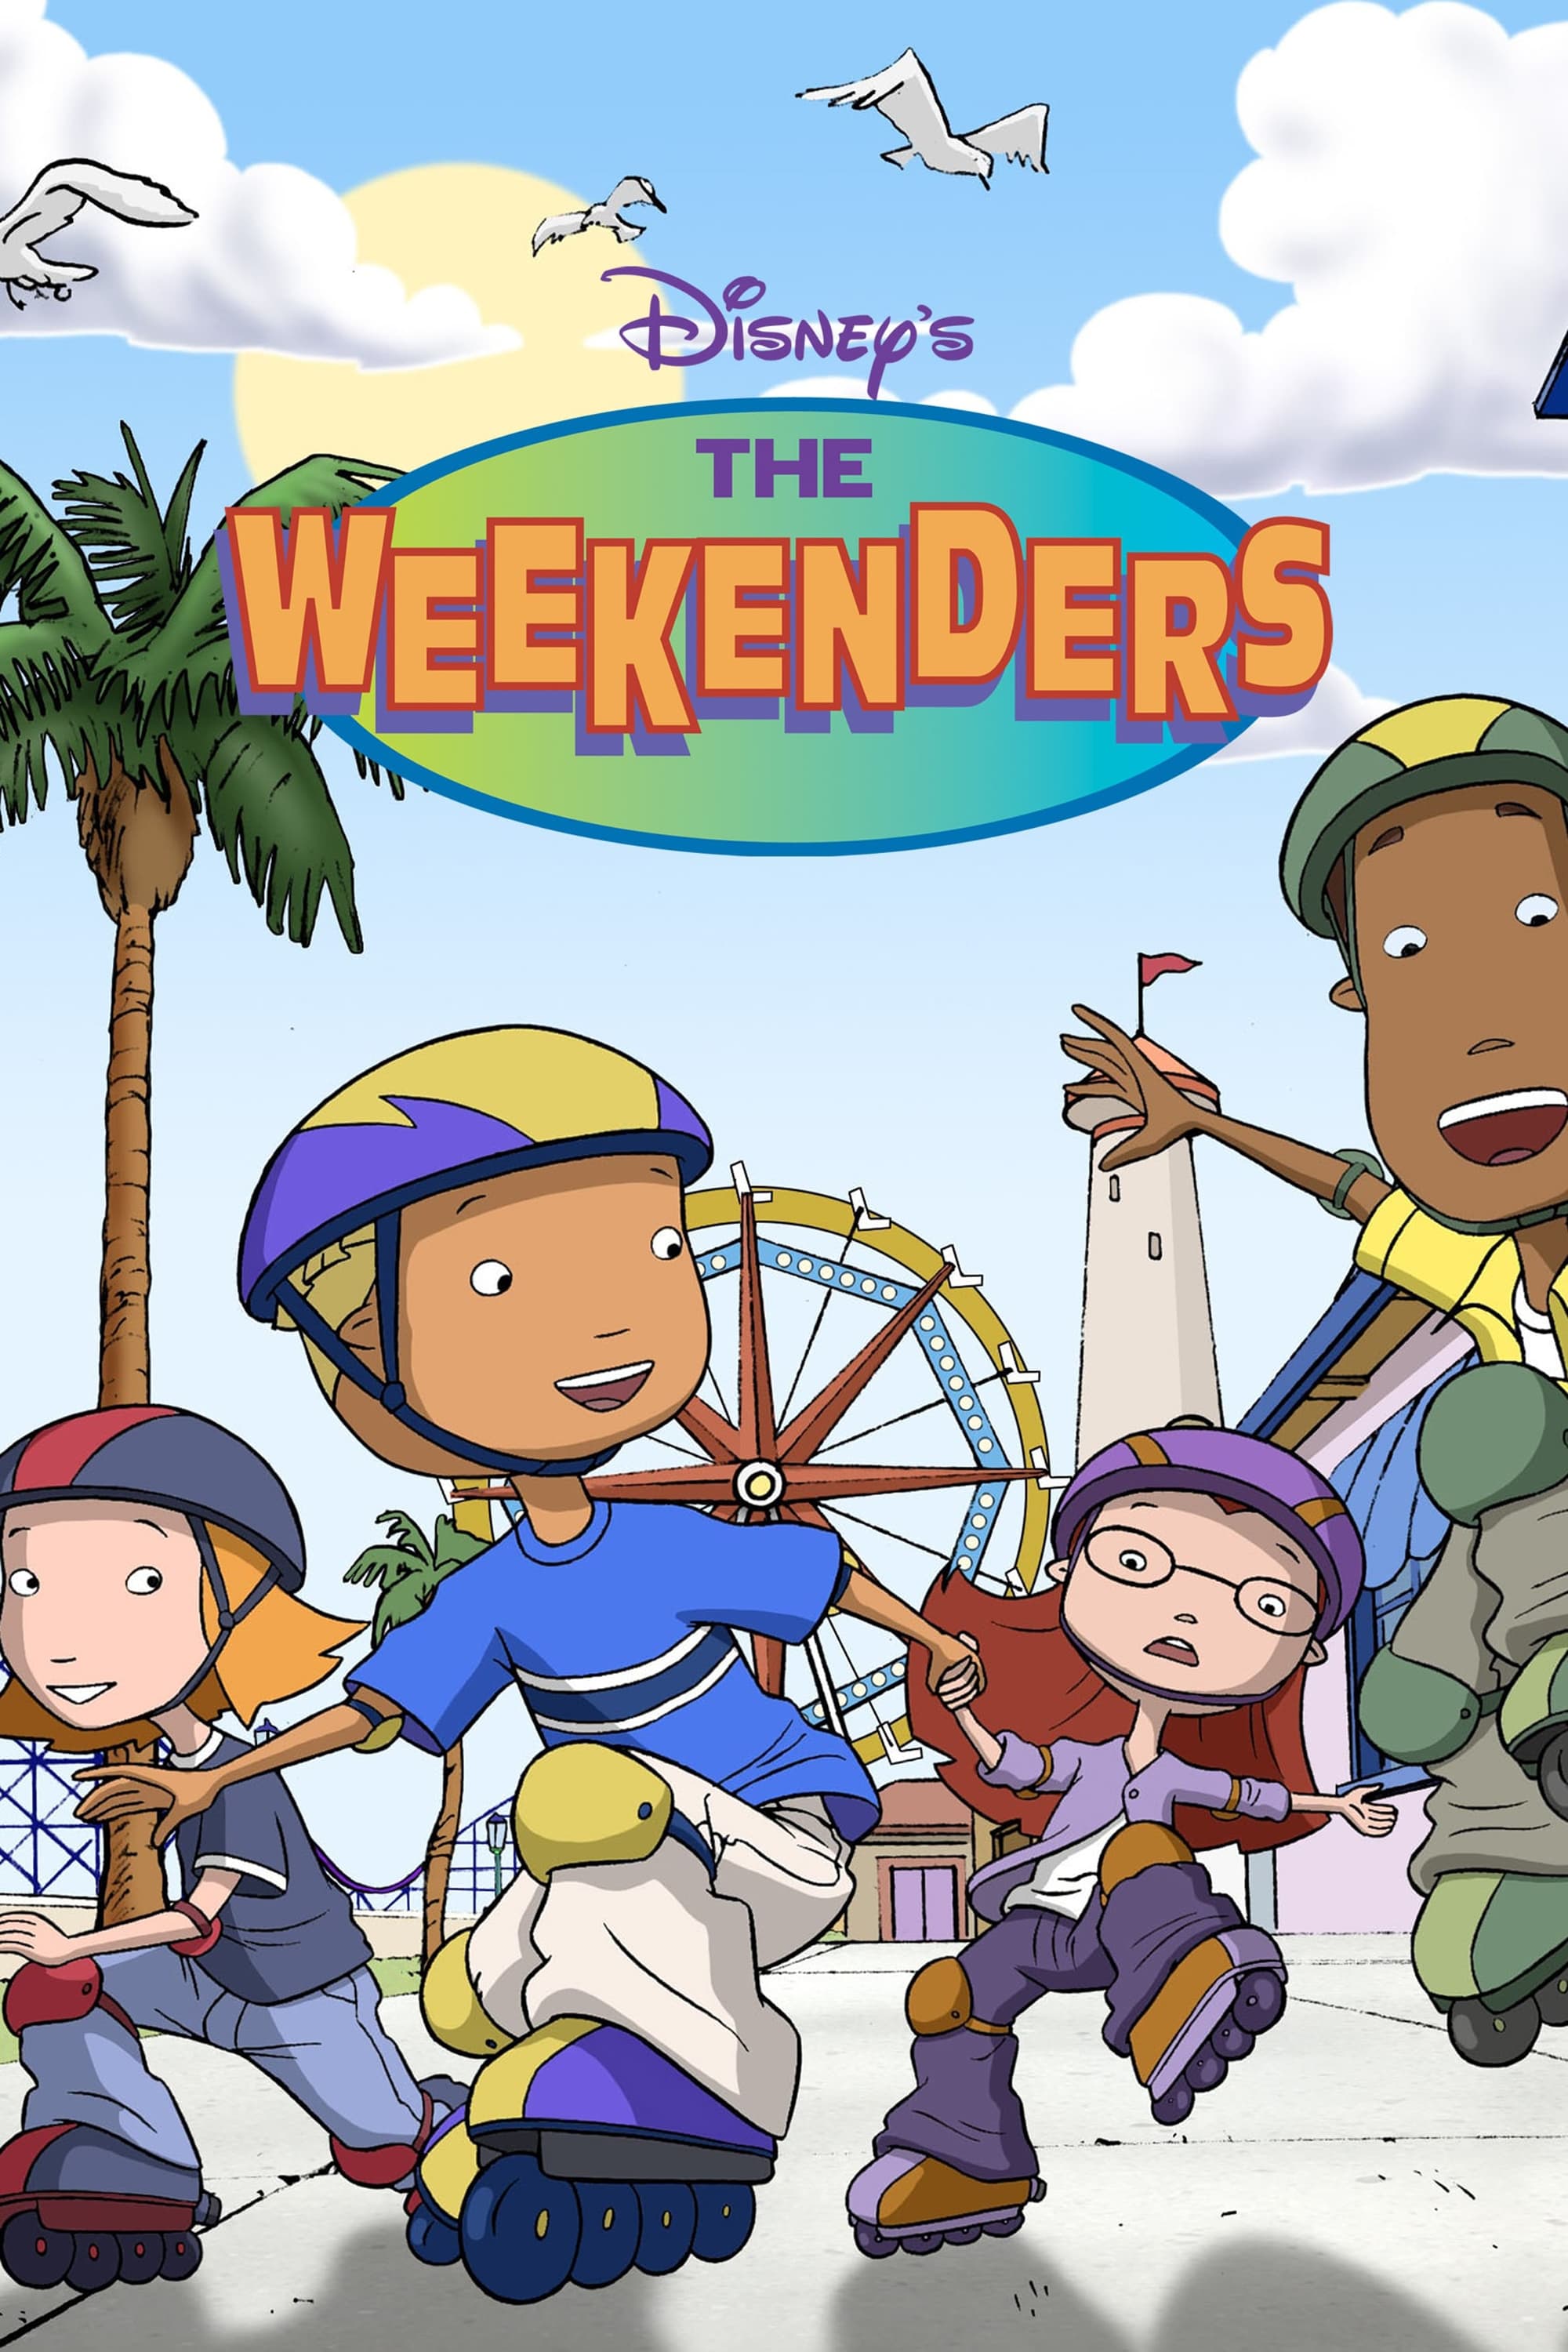 https://static.wikia.nocookie.net/international-entertainment-project/images/f/f1/The_Weekenders_-_poster.jpg/revision/latest?cb=20230916180940